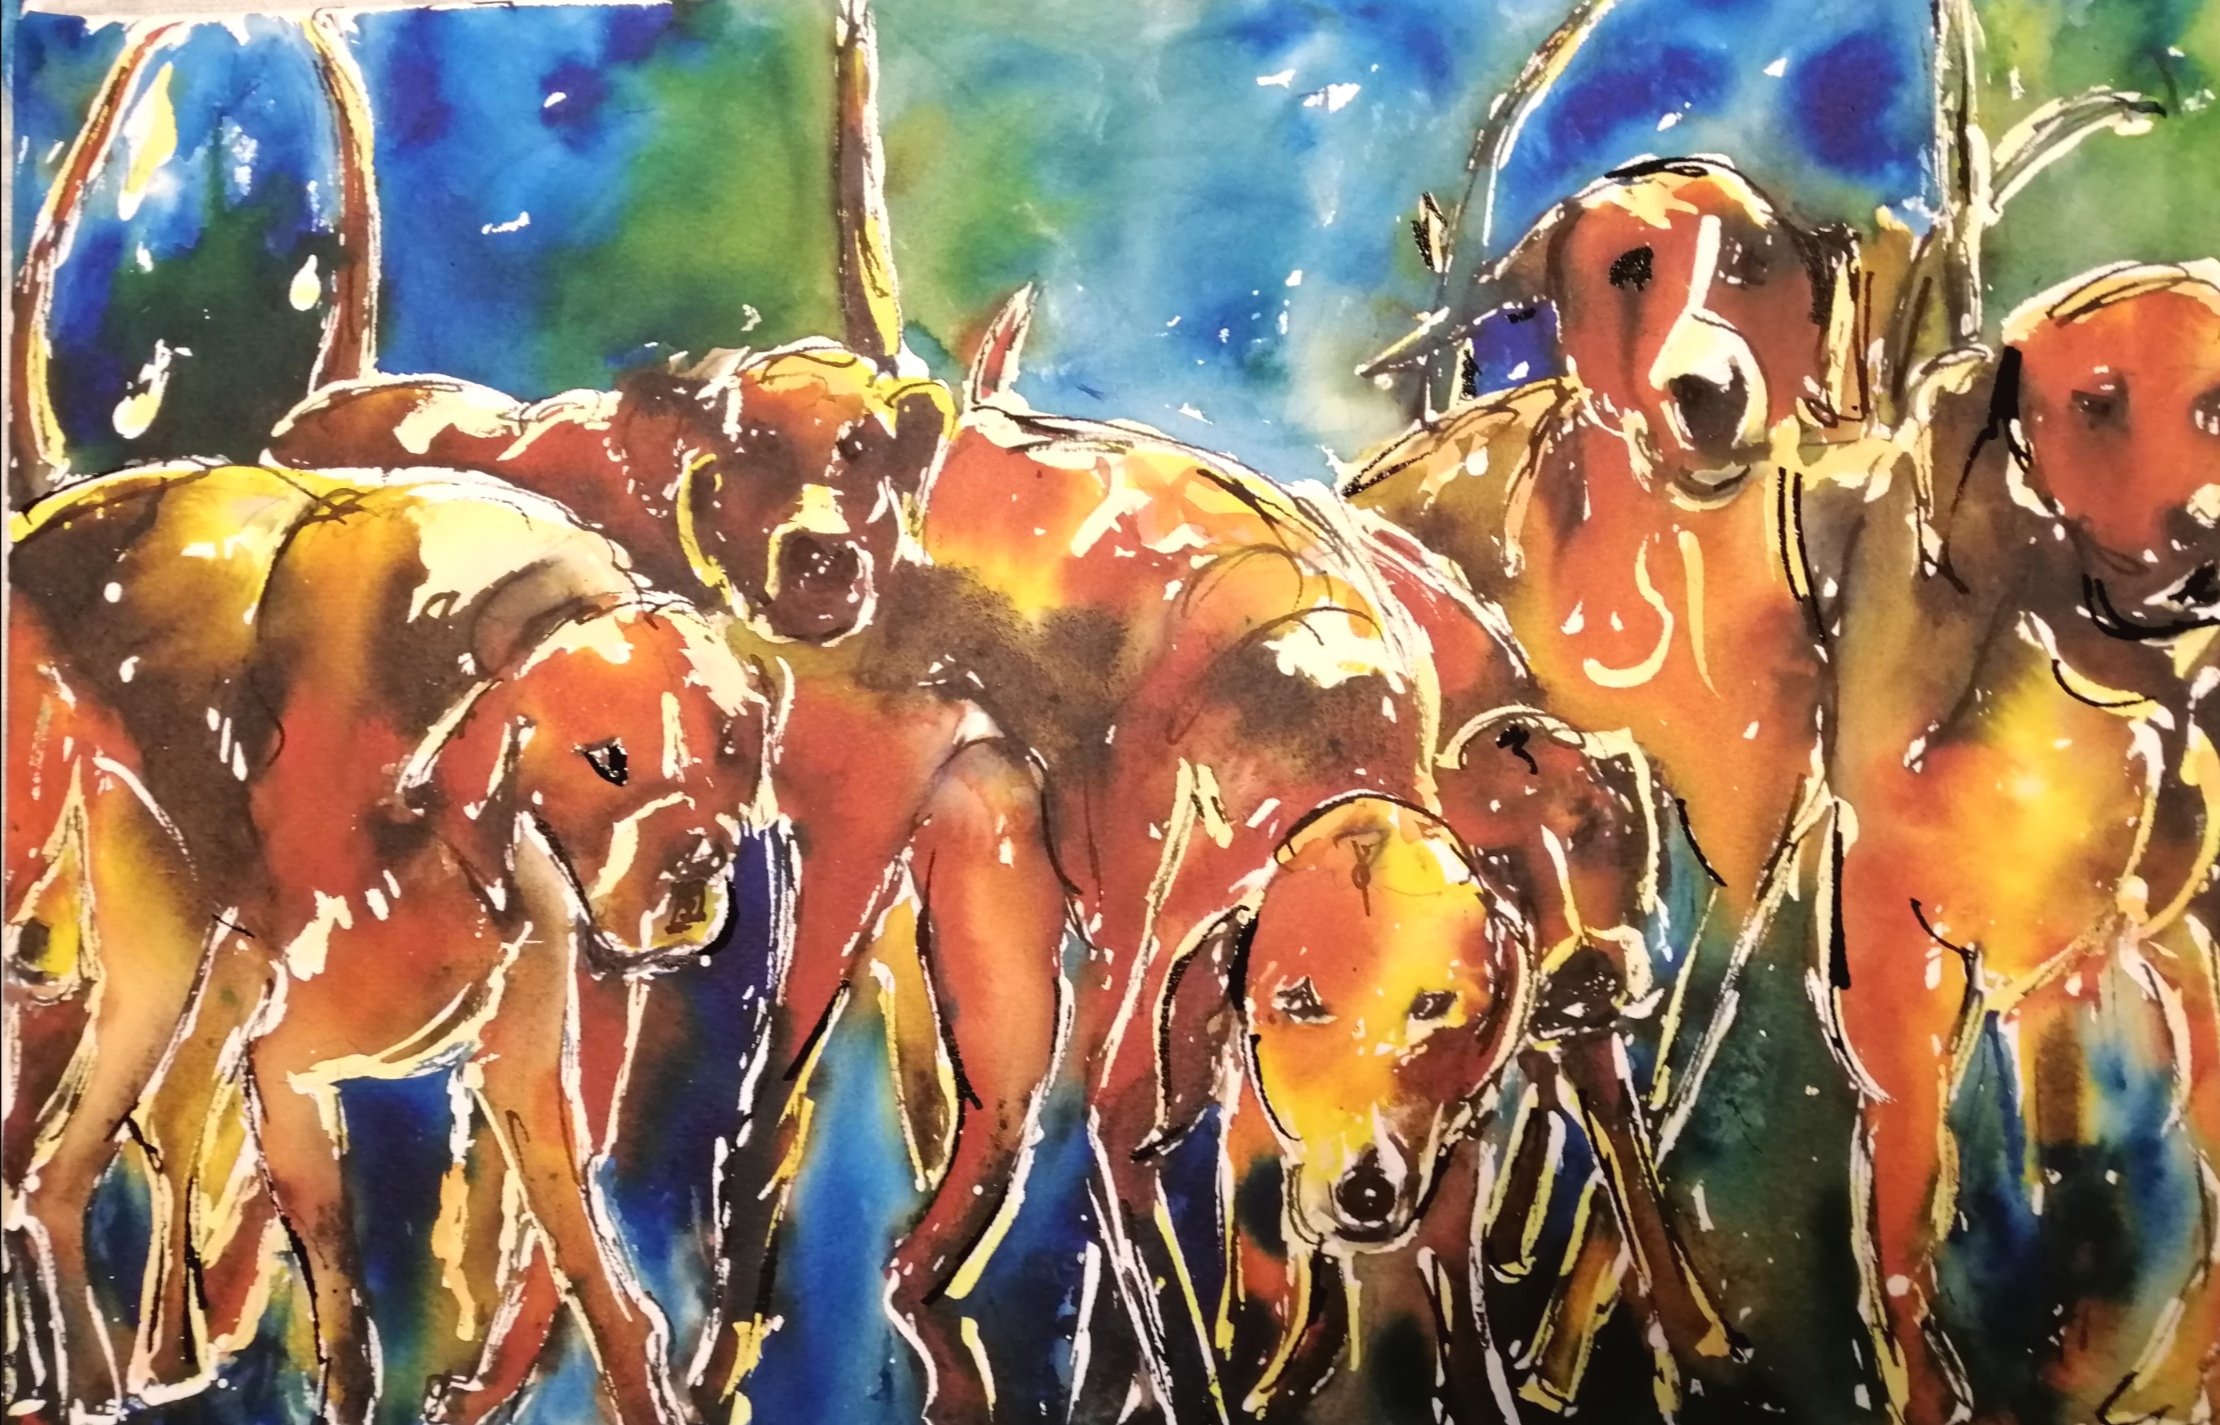 Hounds in Vibrant mixed media and inks 1 hour